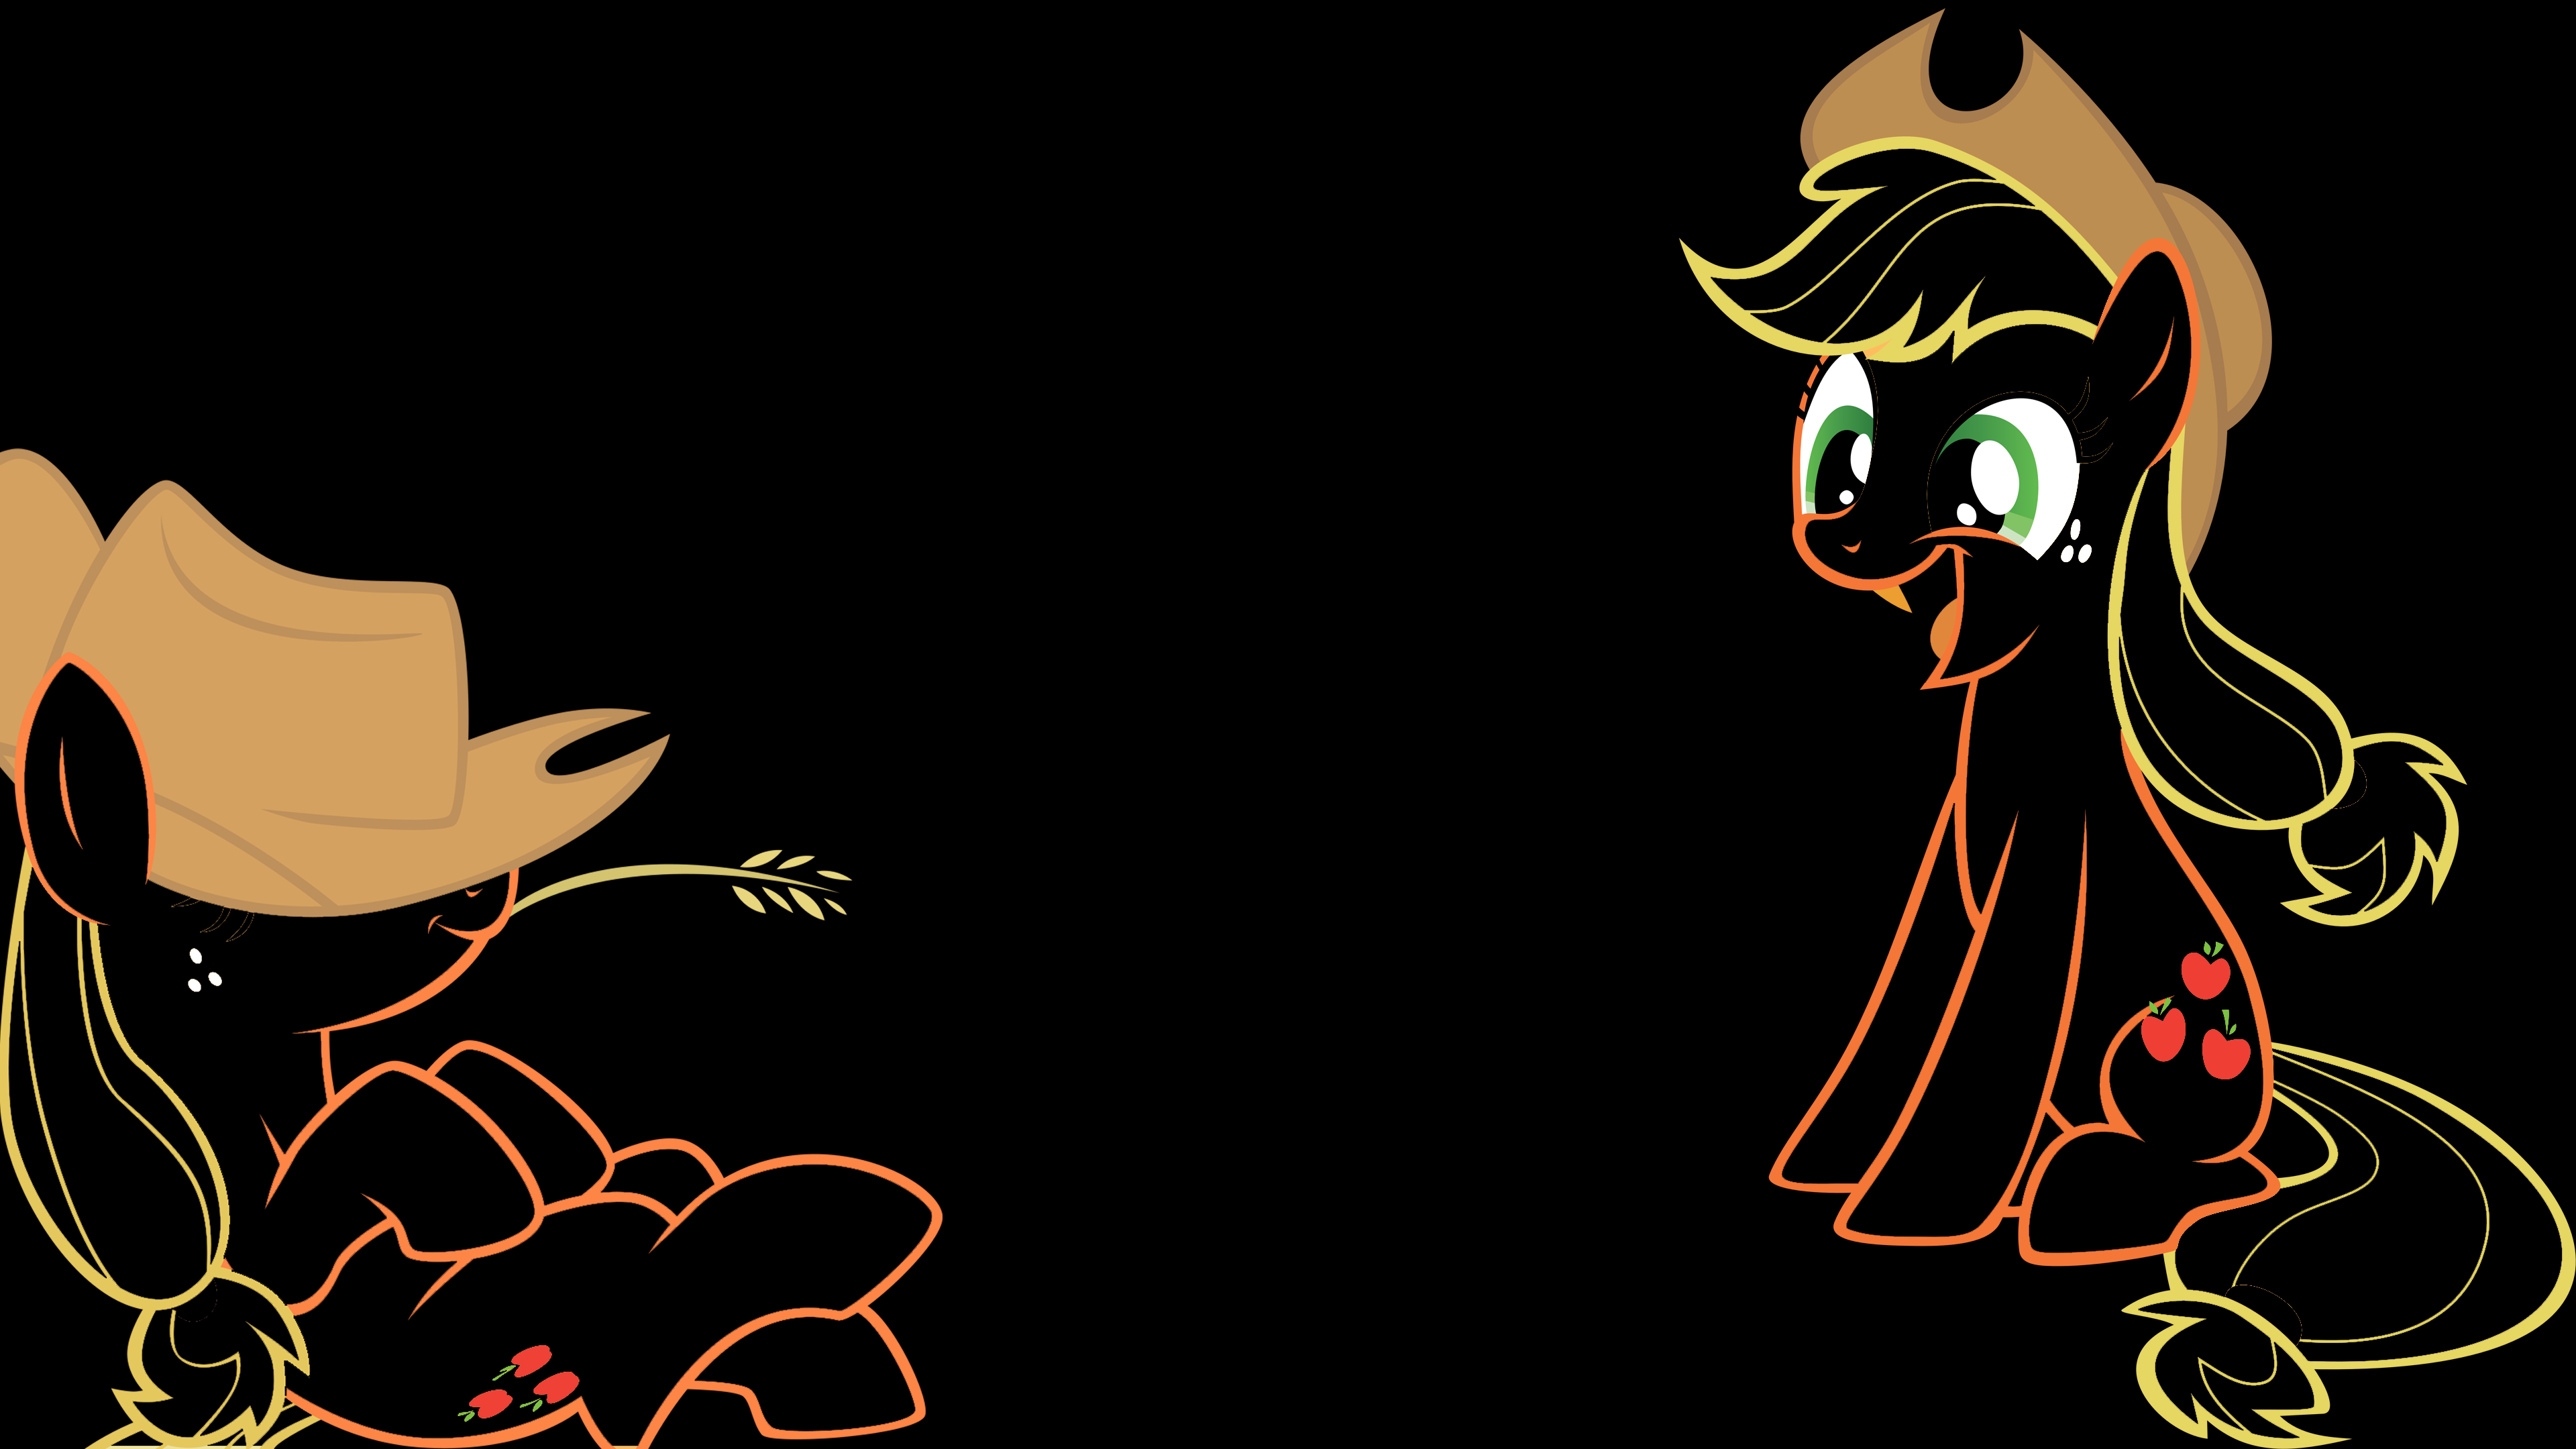 A colorful digital wallpaper featuring Applejack from the TV show My Little Pony: Friendship is Magic.